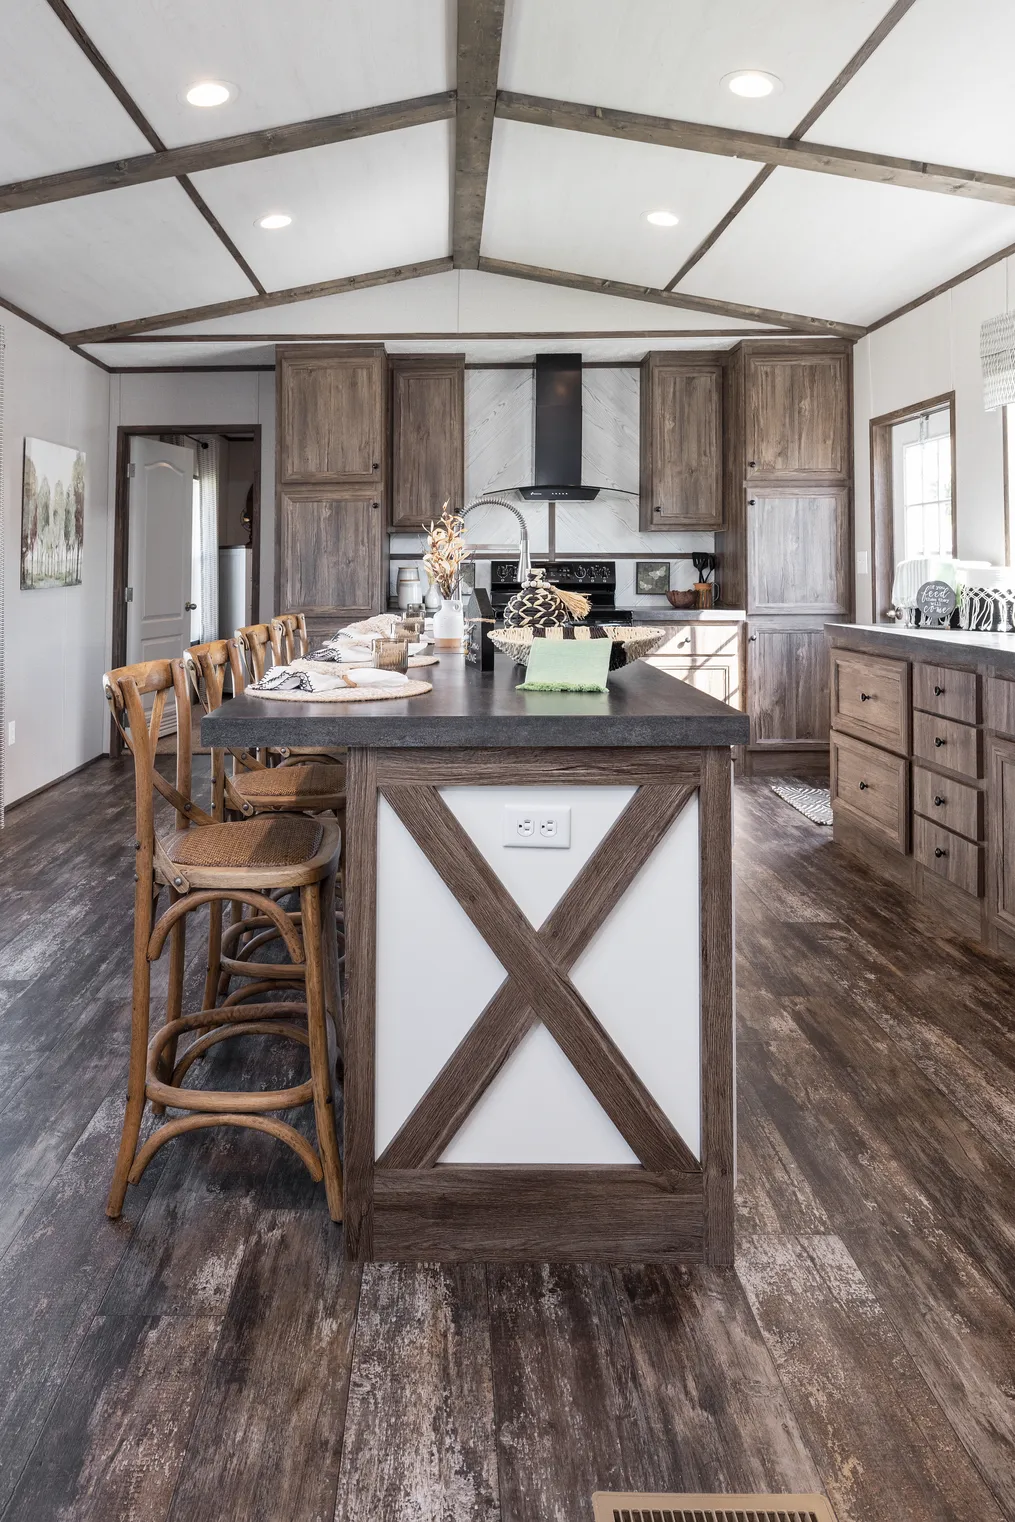 THE SURE THING Kitchen. This Home features 3 bedrooms and 2 baths.